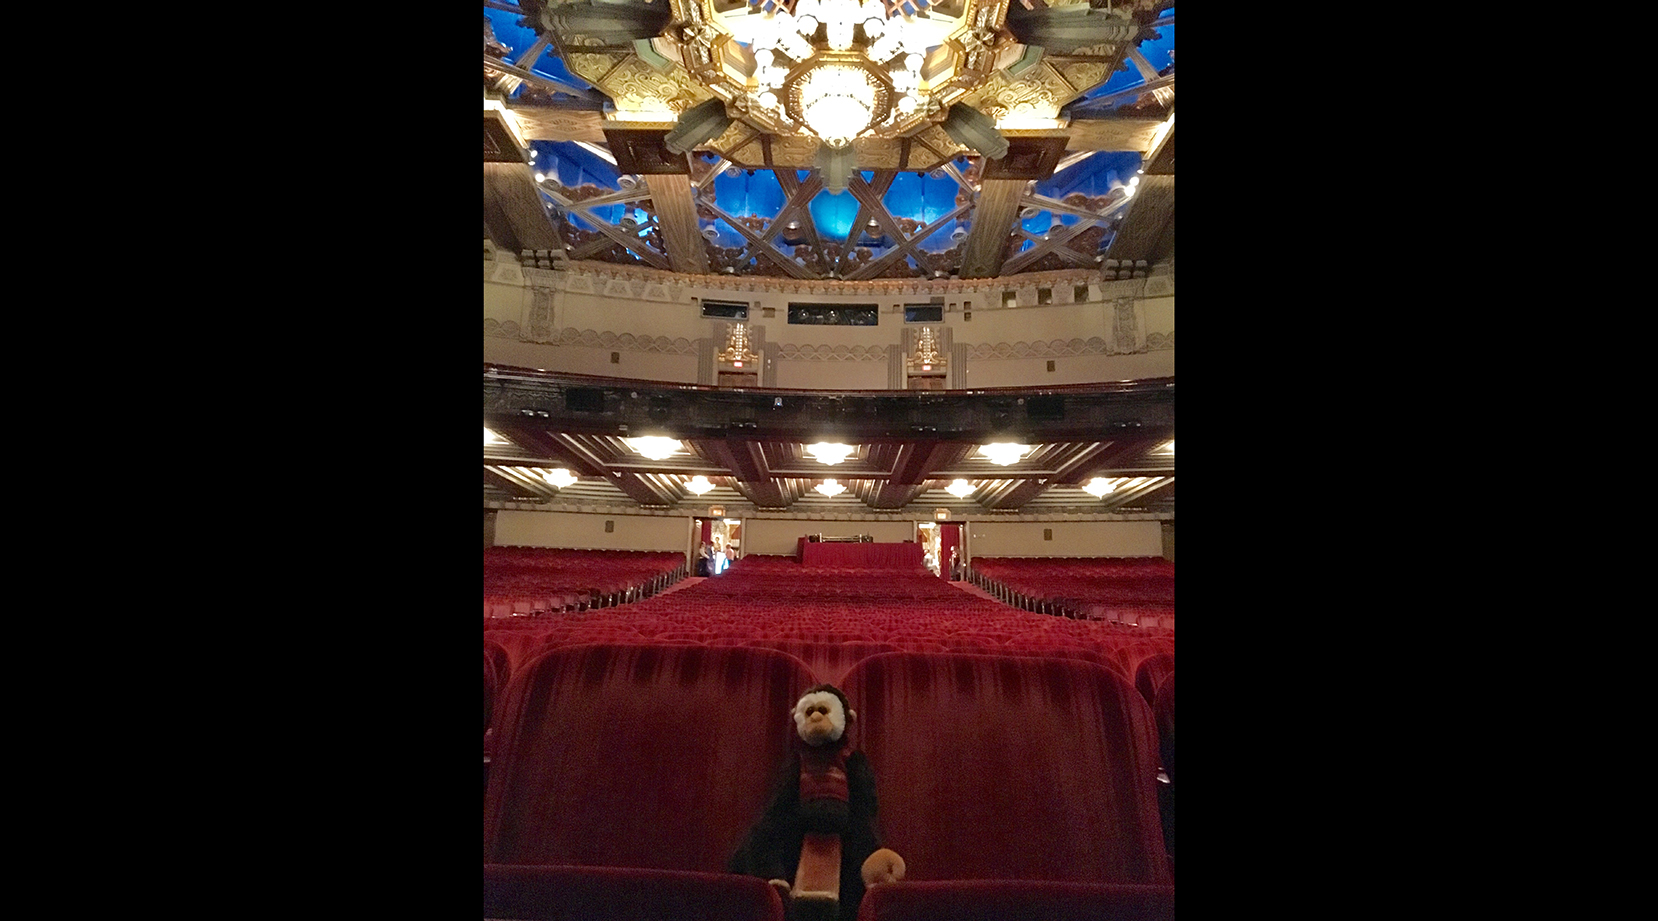 Our social media mascot (from The Drowsy Chaperone, Festival 2004) takes in the Pantages house.